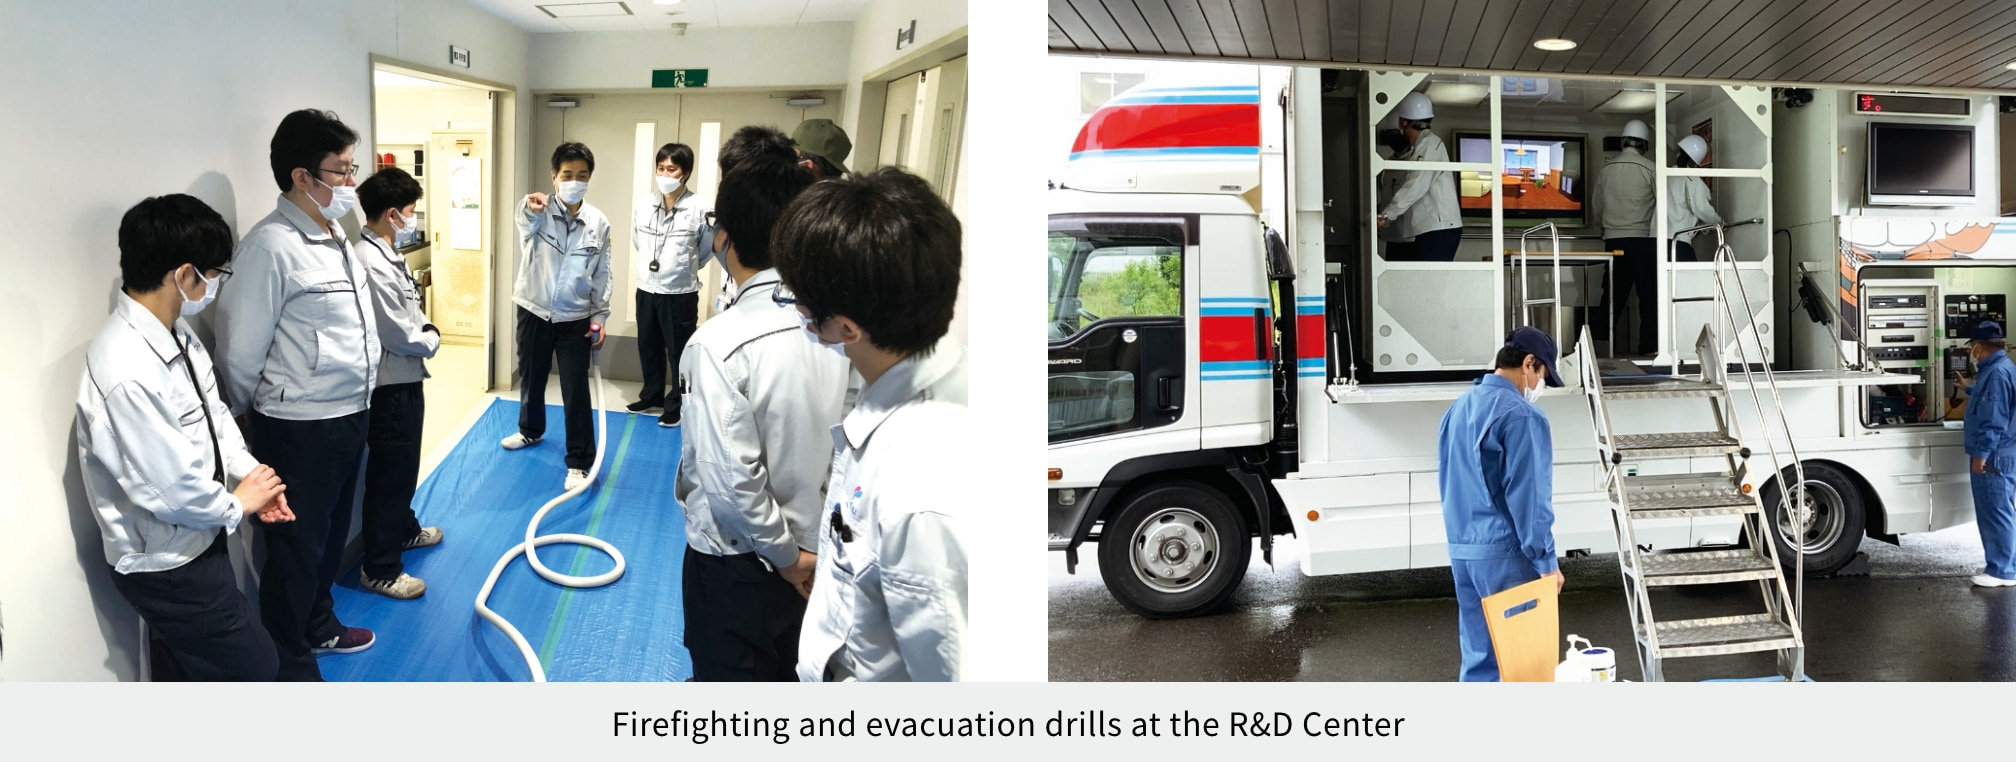 Firefighting and evacuation drills at the R&D Center